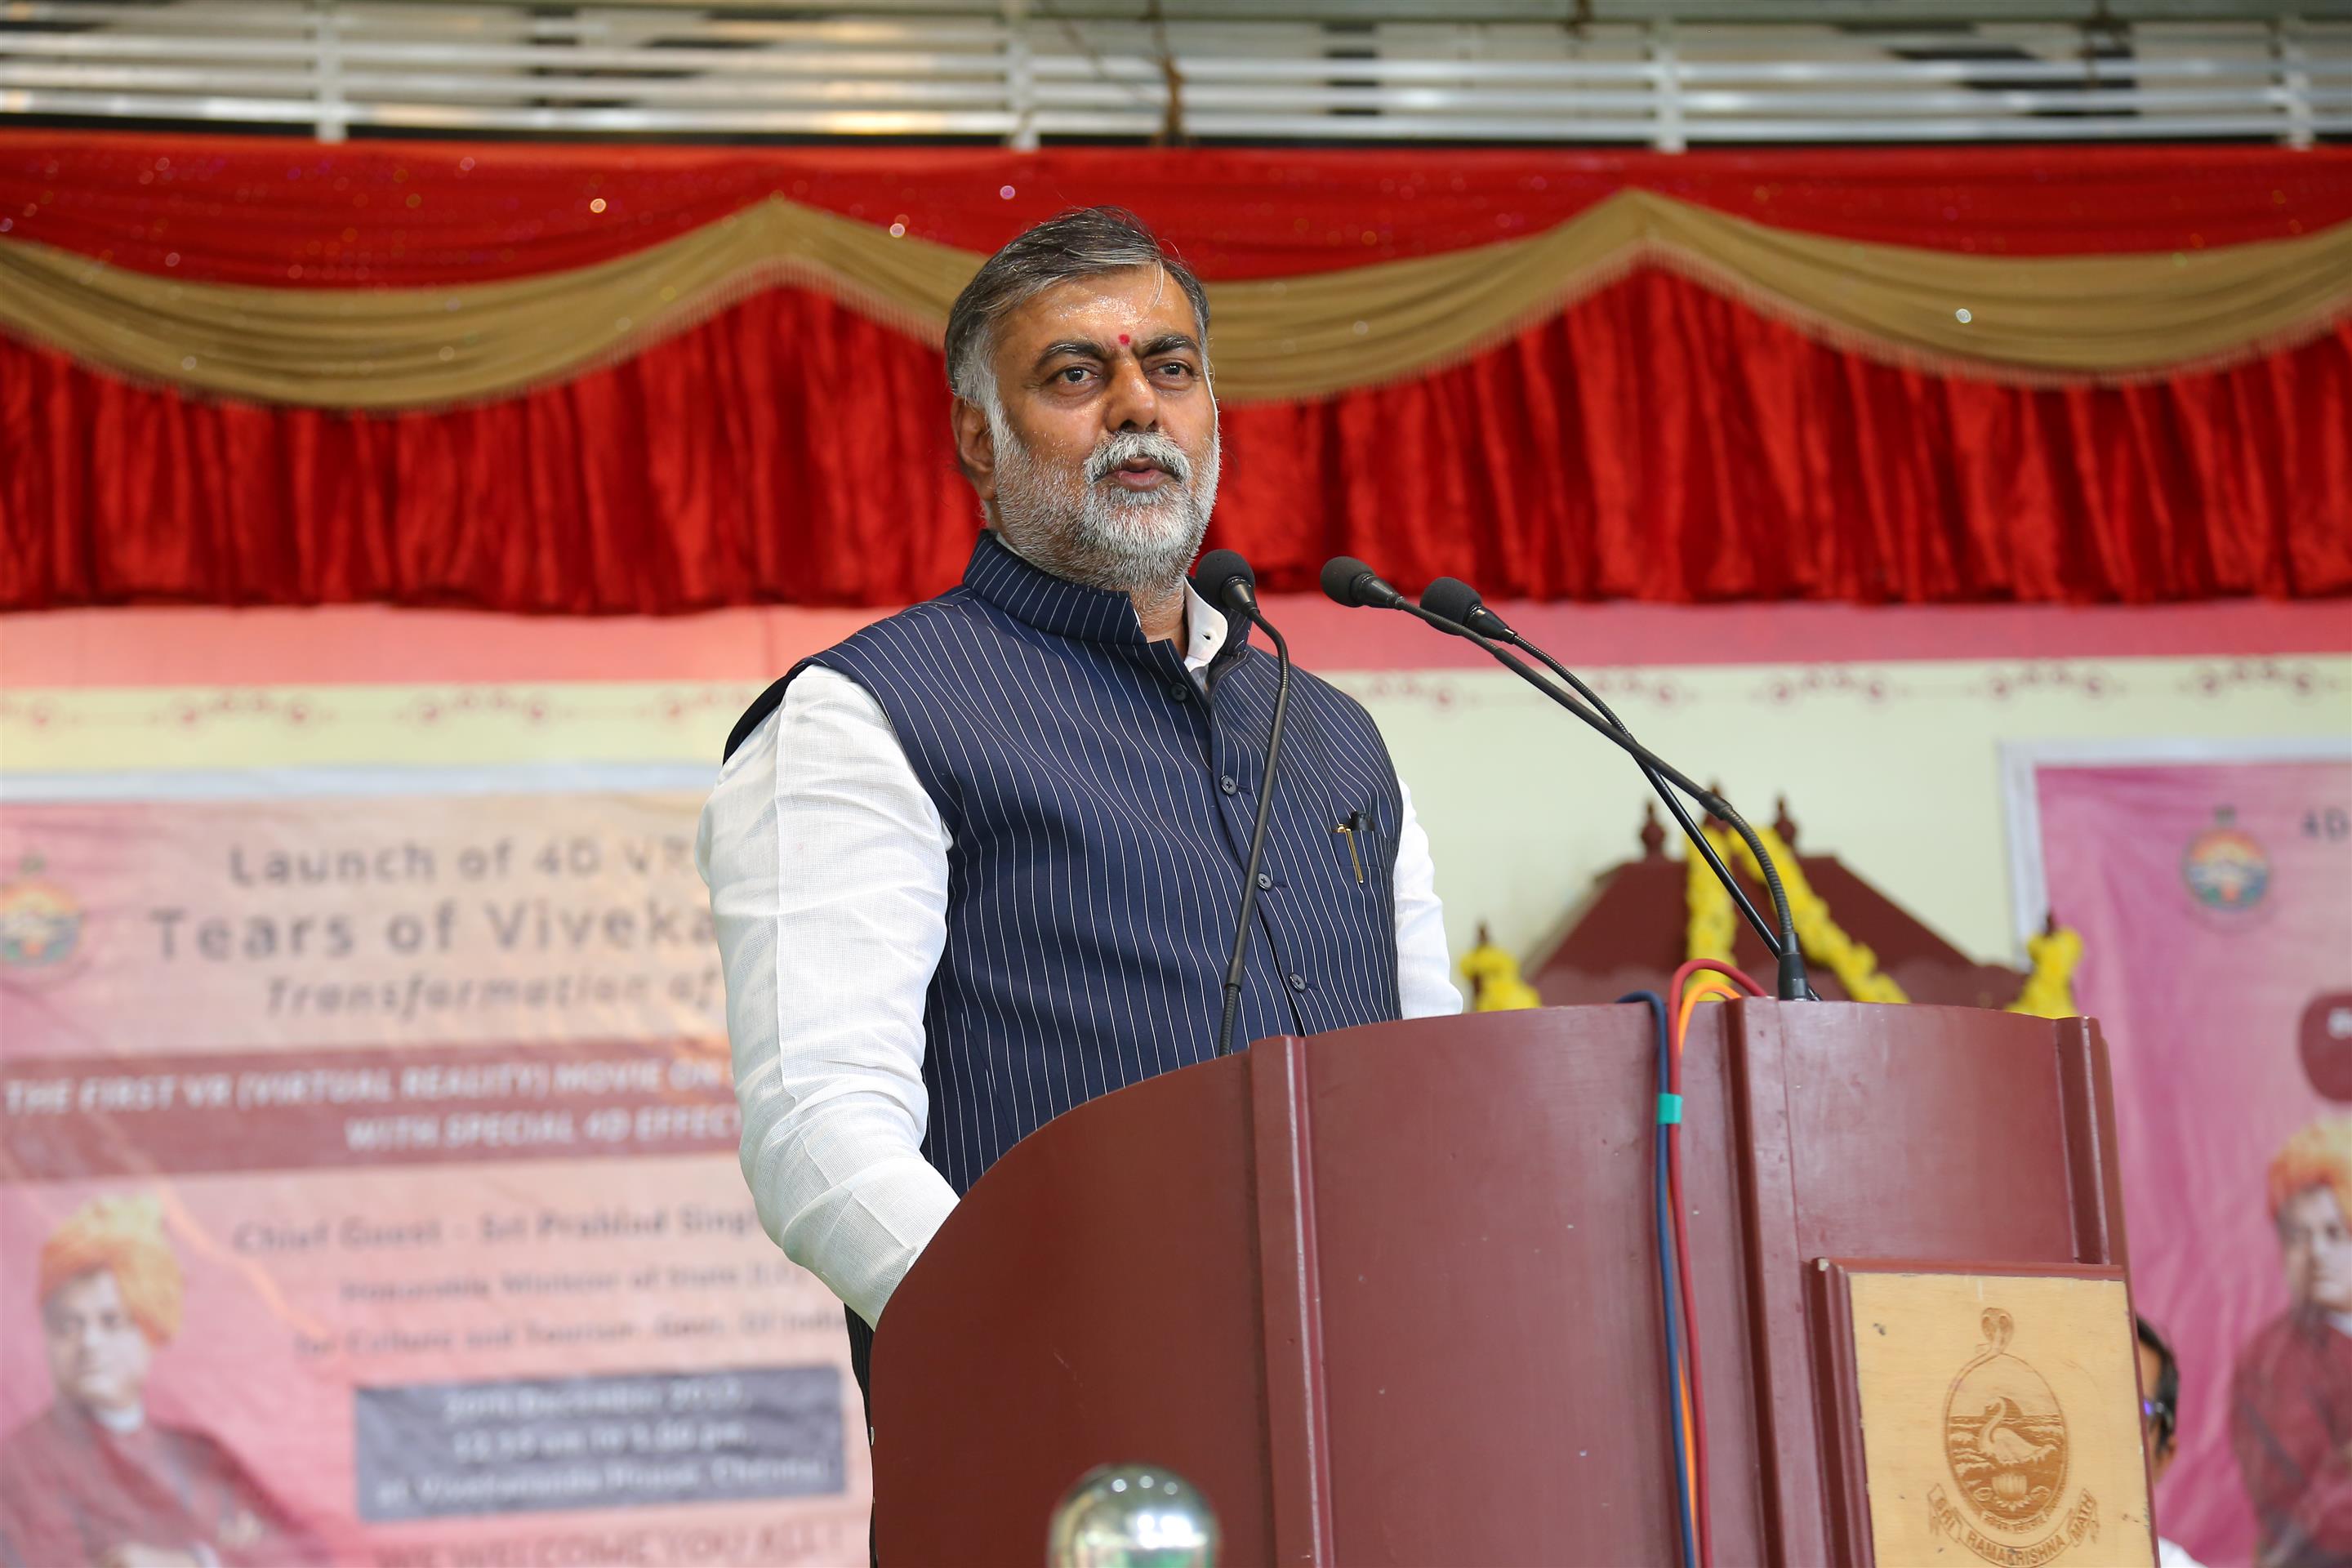 Union Minister of State (I/C) for Culture and Tourism Shri Prahlat Singh Patel is addressing the gathering at the launch of 4D VR Movie 'Tears of Vivekananda' - Transformation of life today in Chennai. (December 20, 2019)